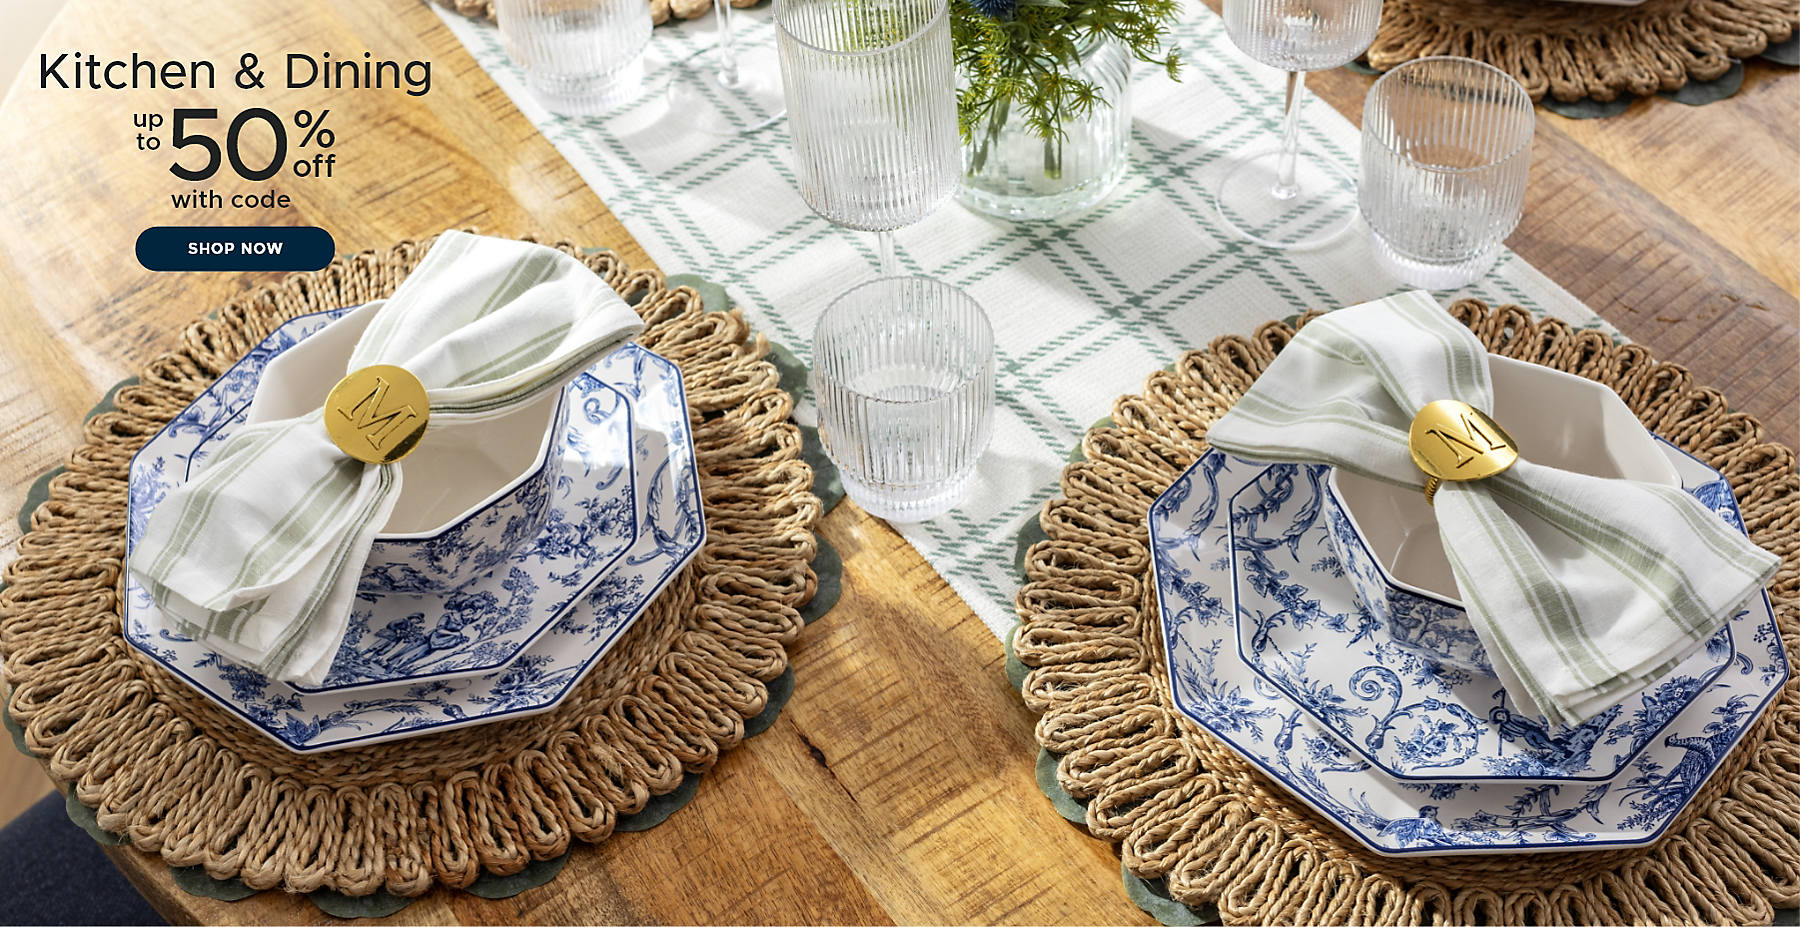 Kitchen & Dining up to 50% off with code shop now